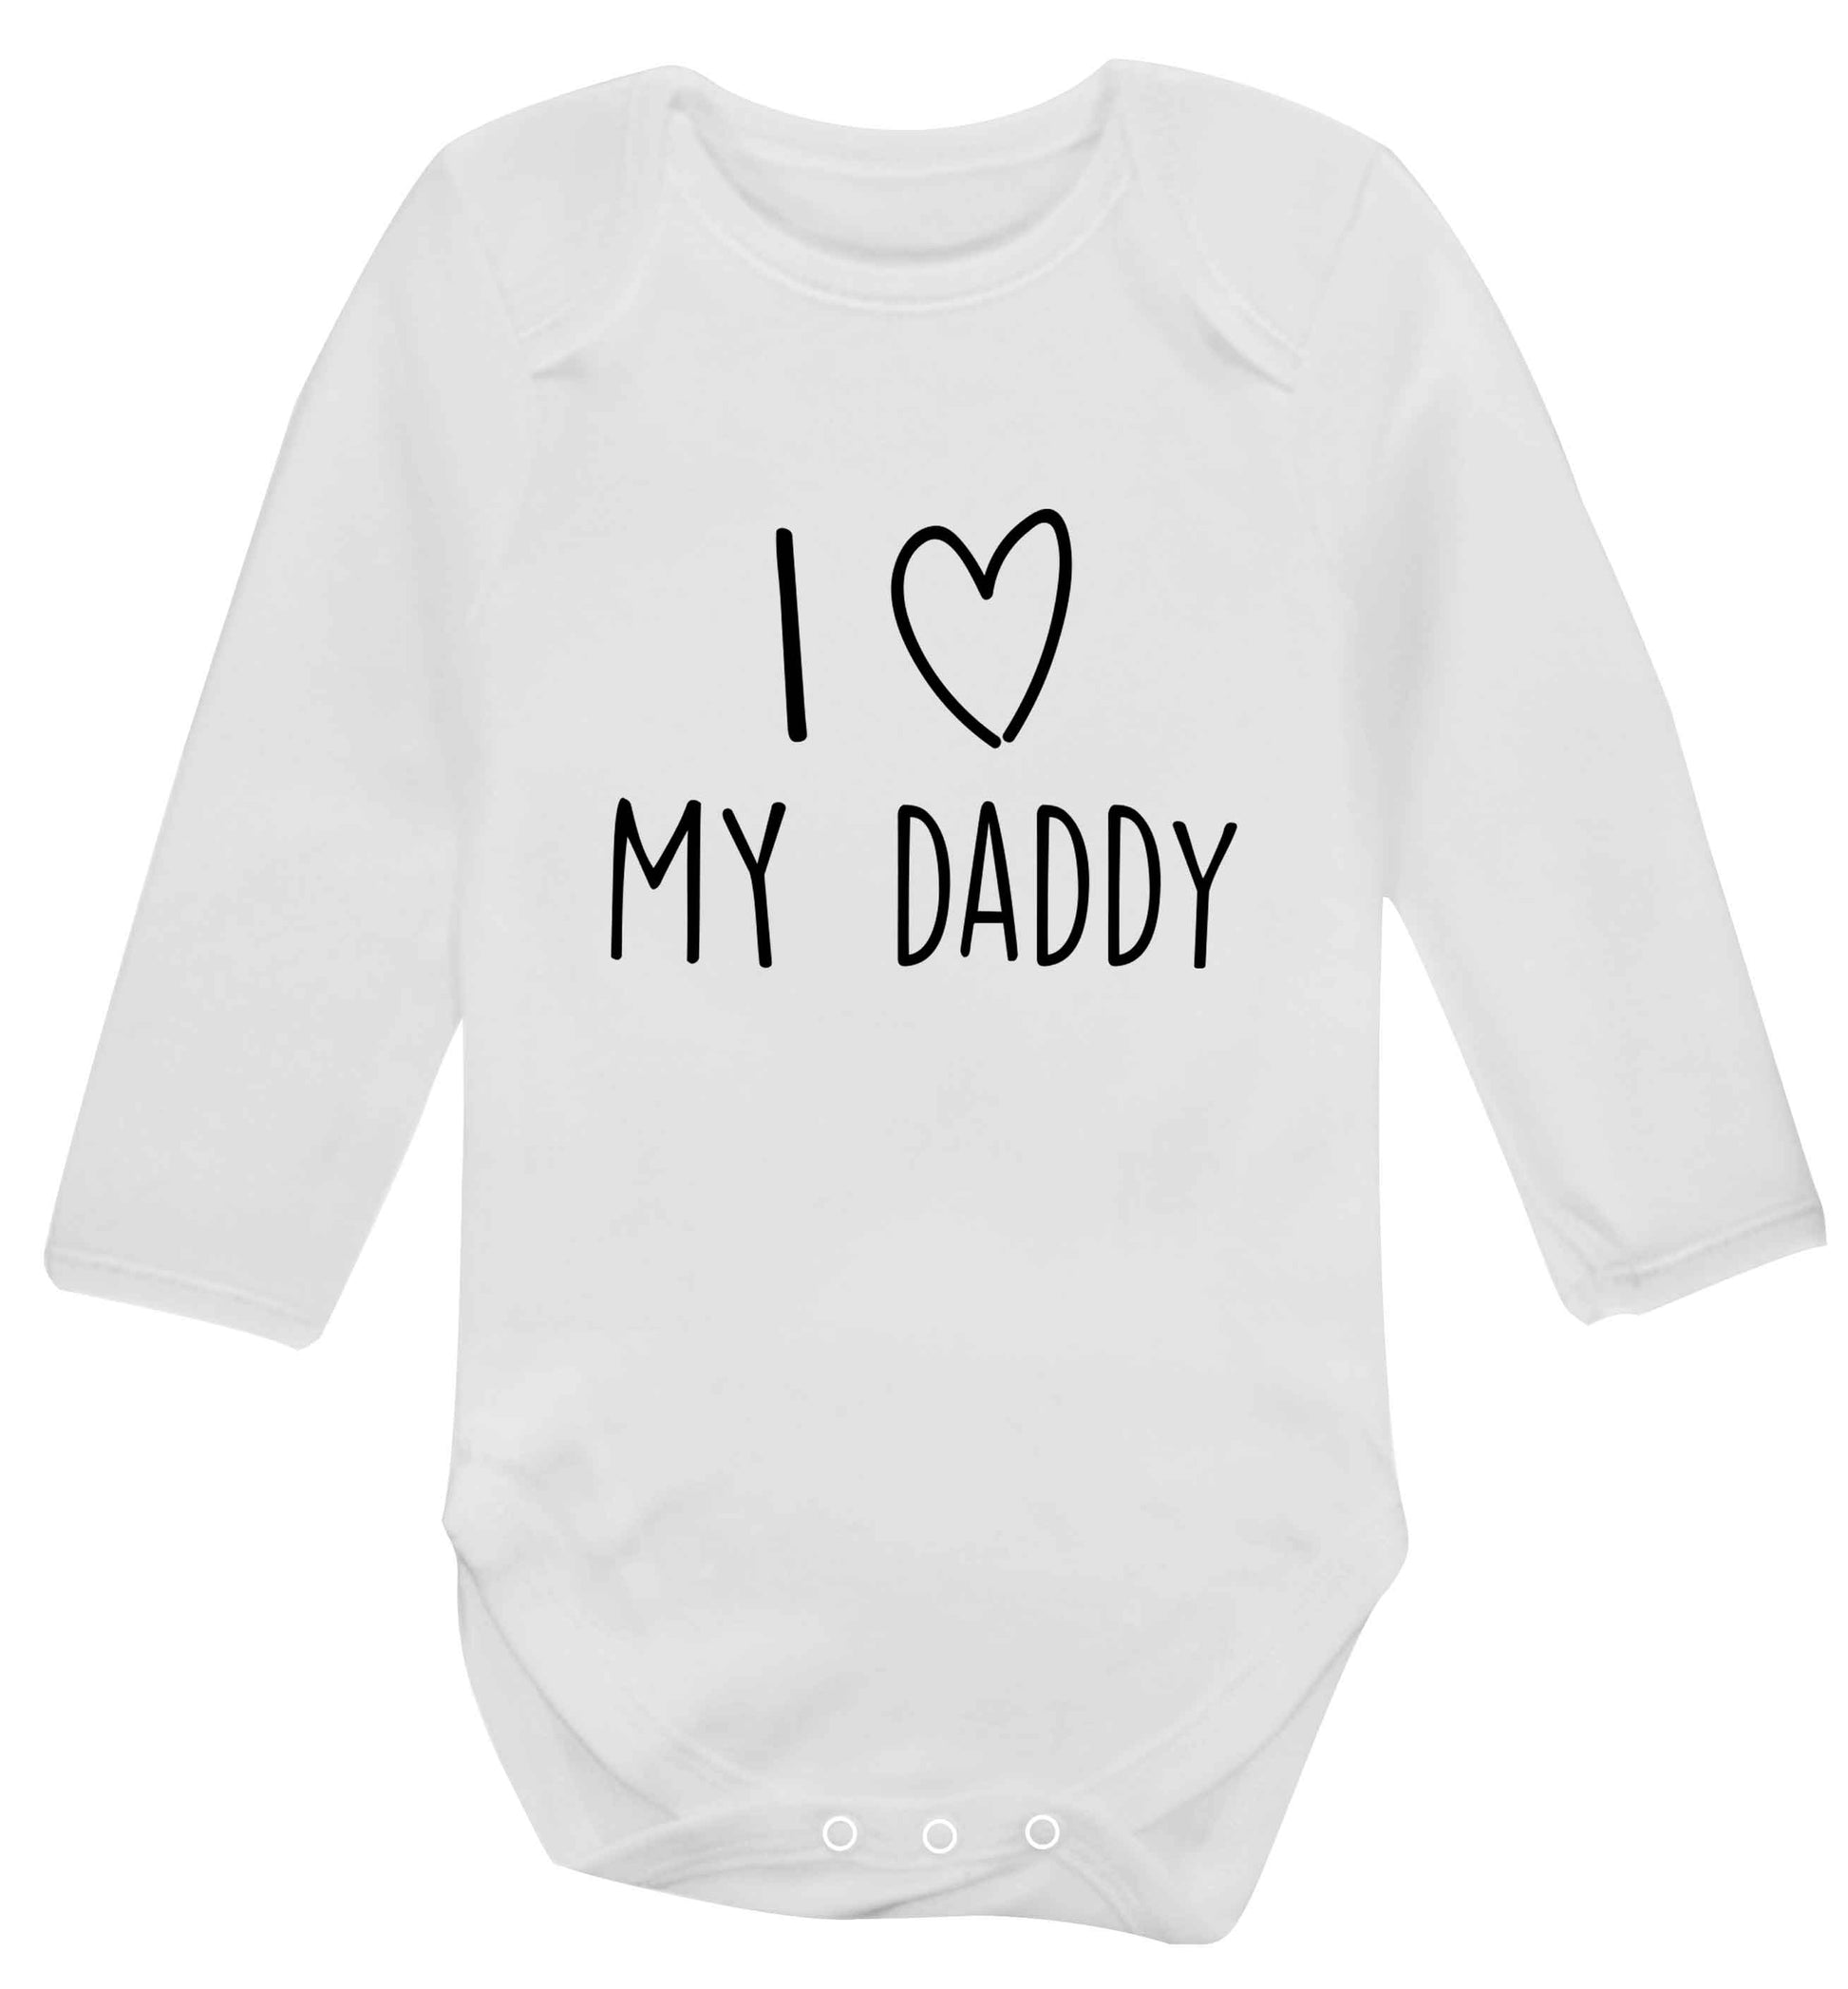 I love my daddy baby vest long sleeved white 6-12 months